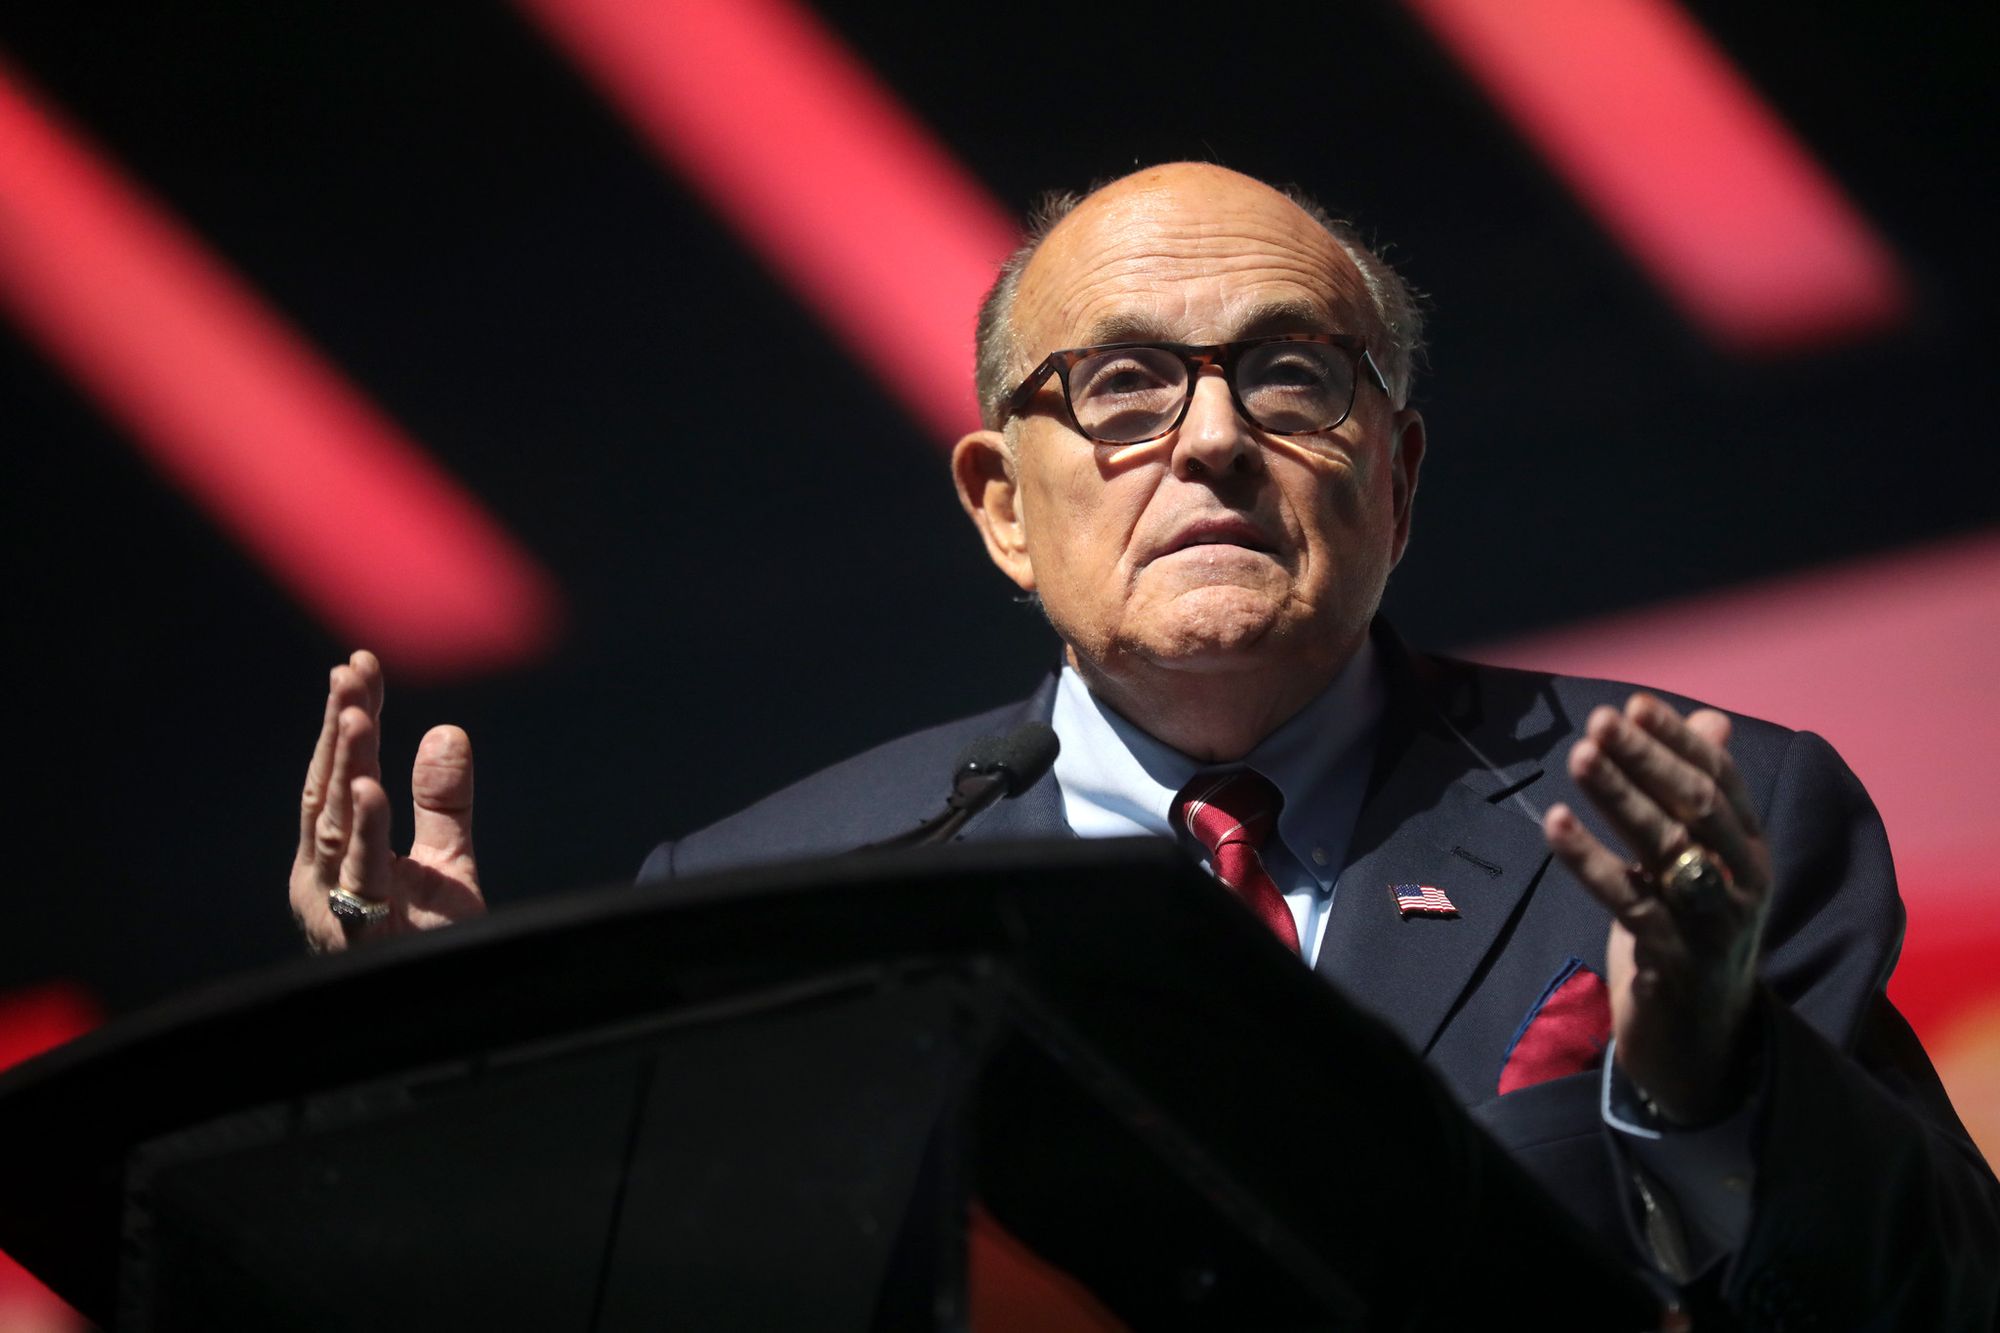 Why Rudy Giuliani isn't welcome at NH Institute of Politics